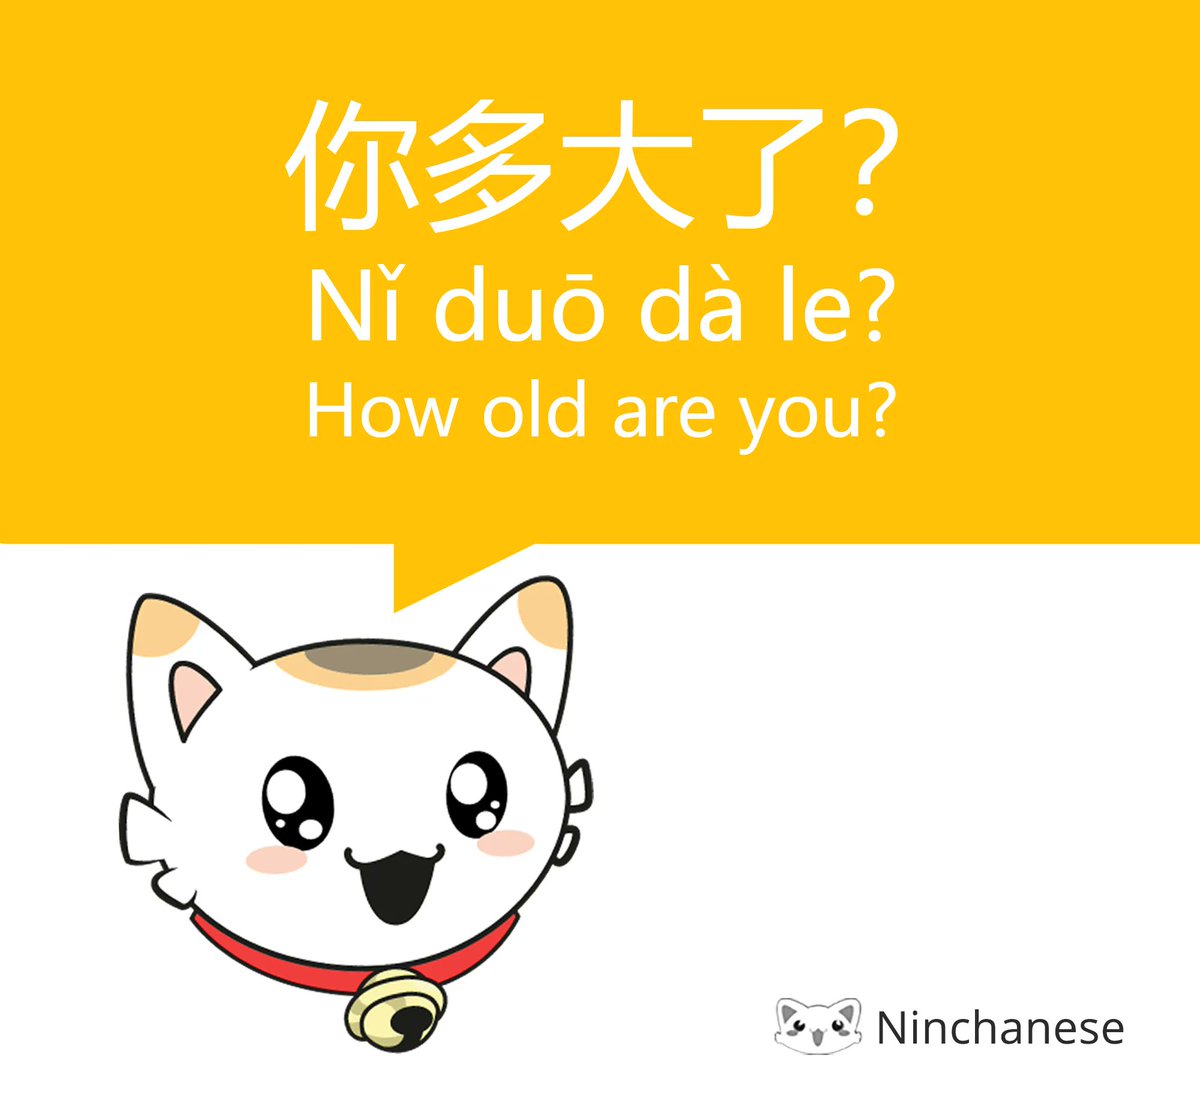 🎂 Ask someone's age in Chinese with this purrfect phrase:

你多大了？
Nǐ duō dà le?
How old are you?

Give it a try and make fur-iends! 😸🐾 Ninchanese makes learning Chinese fun and engaging! 🌟🏆

#LearnChinese #china #chinese #chineseculture #learnmandarin #chineselessons